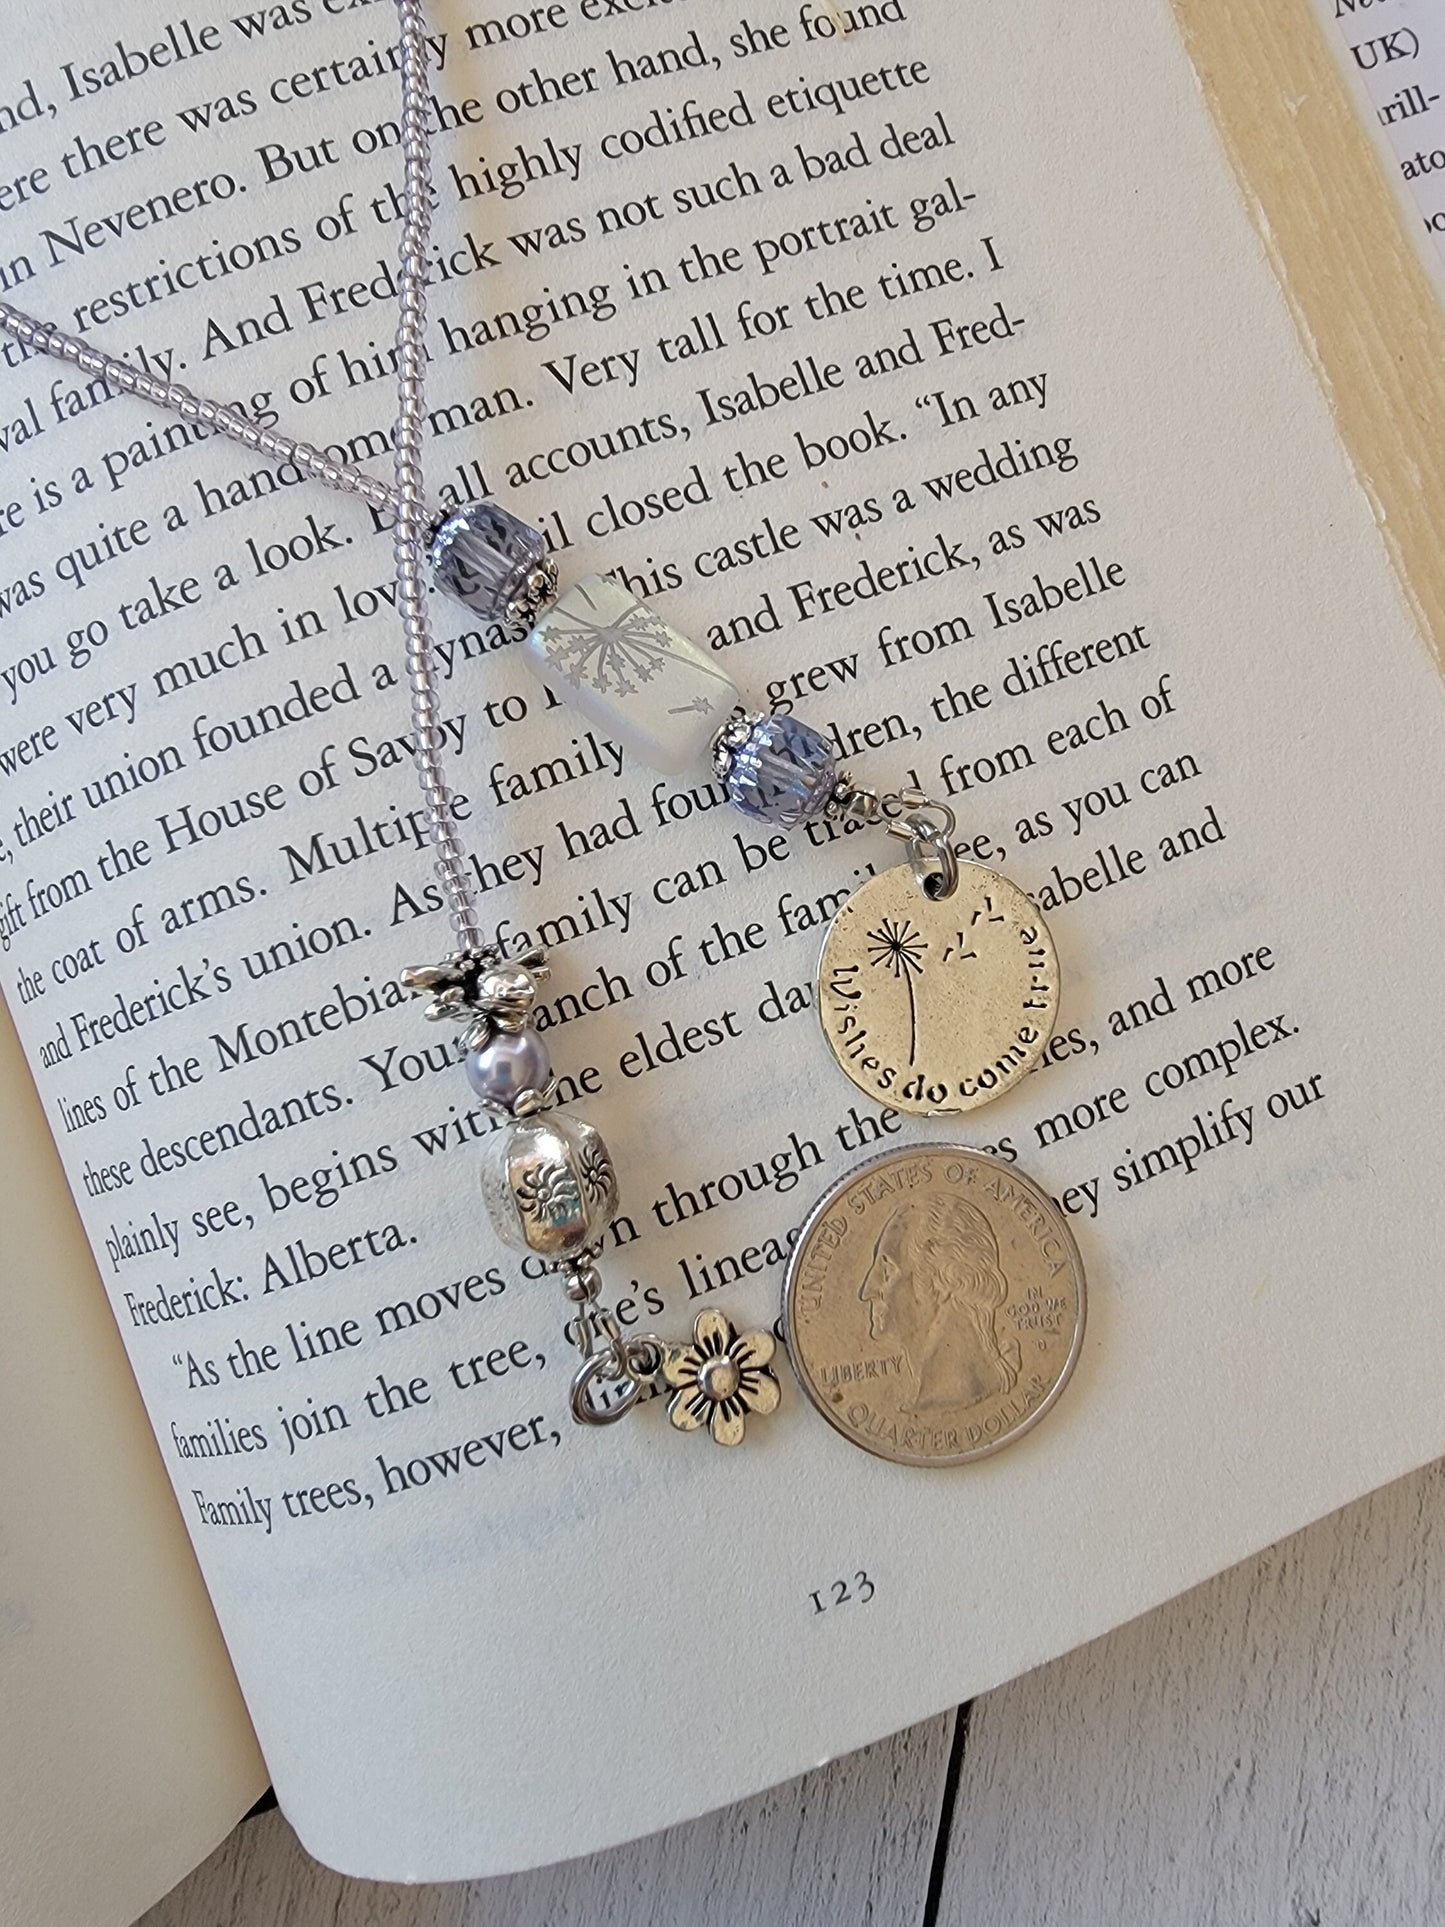 Whimsical Beaded Bookmark with Bee, Dandelion, and Sun: Nature-inspired Reading Accessory